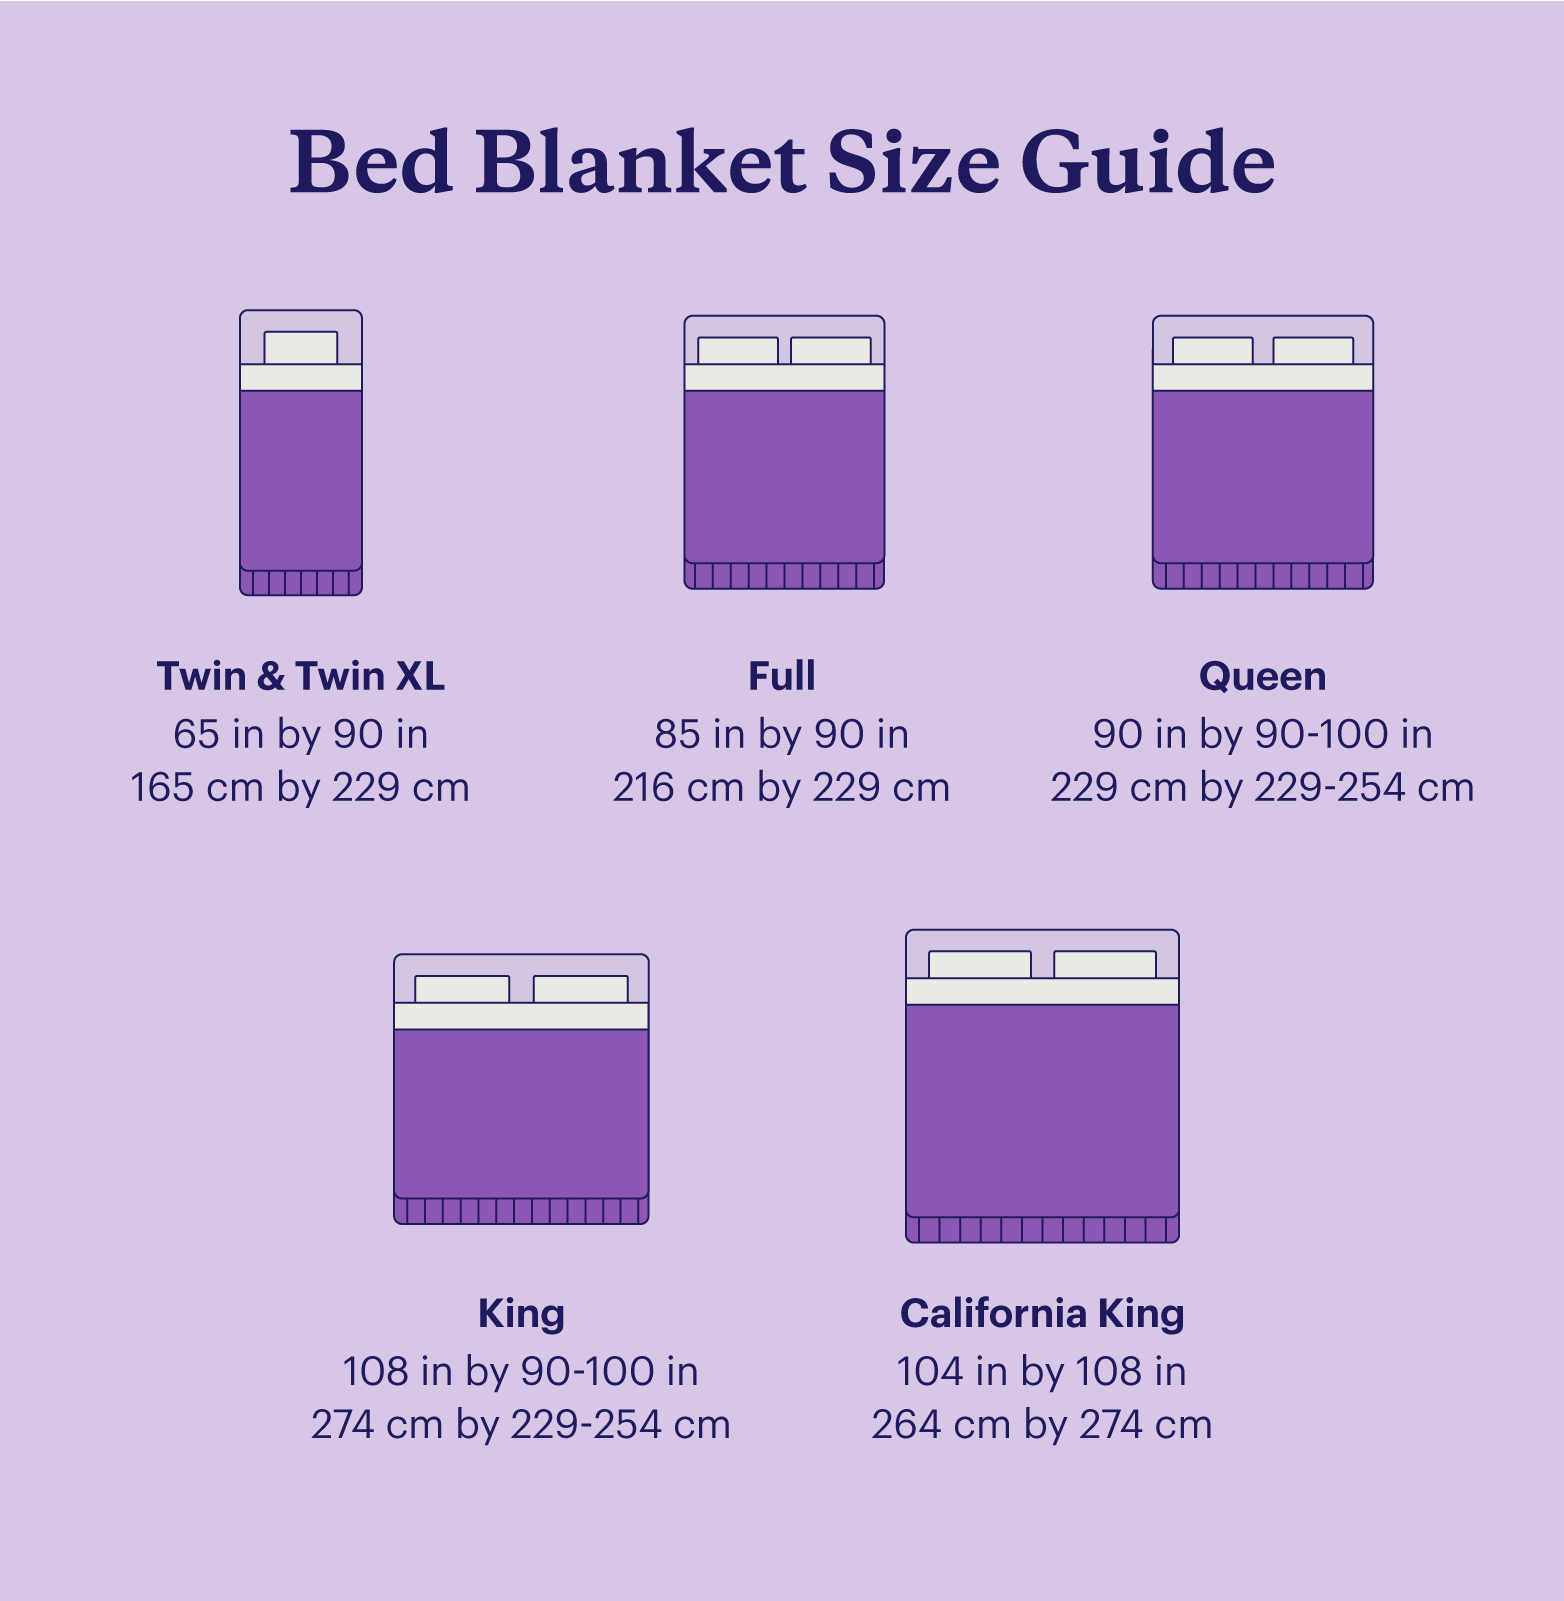 A bed blanket size guide showcases the dimensions of bed blanket sizes in inches and centimeters.